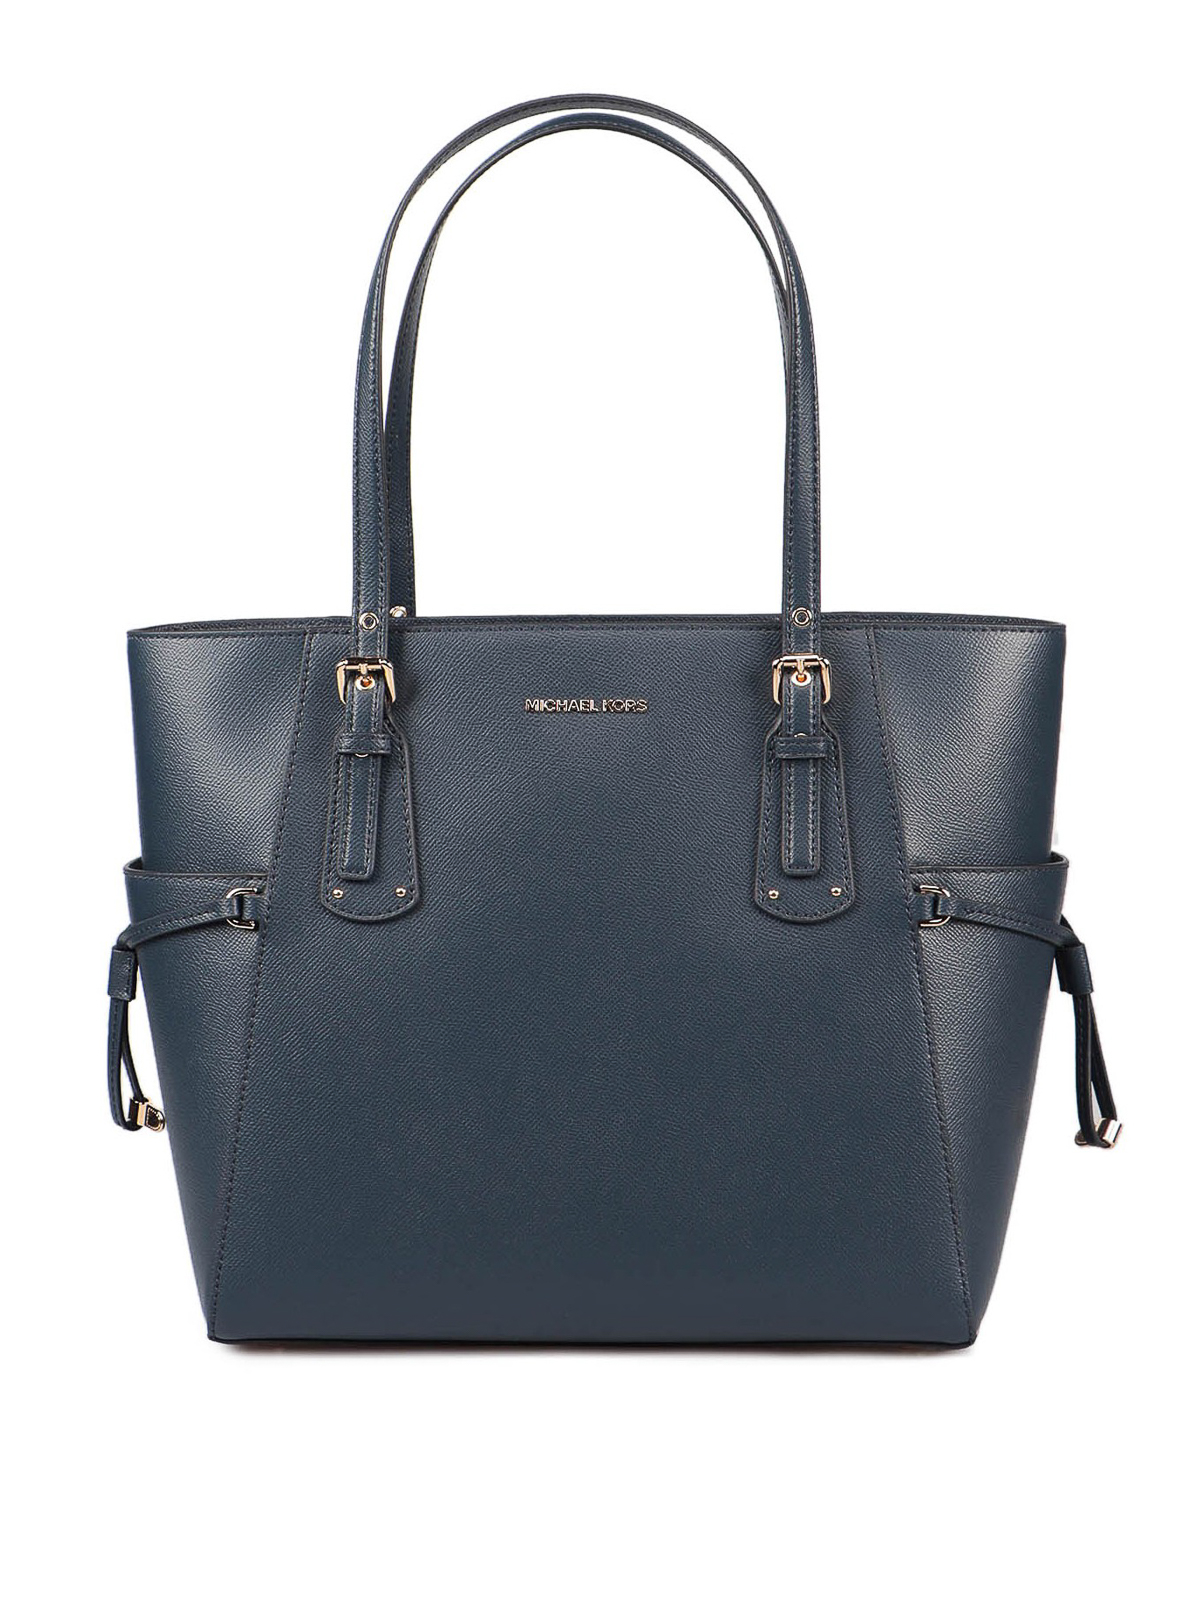 MICHAEL KORS VOYAGER LEATHER TOTE